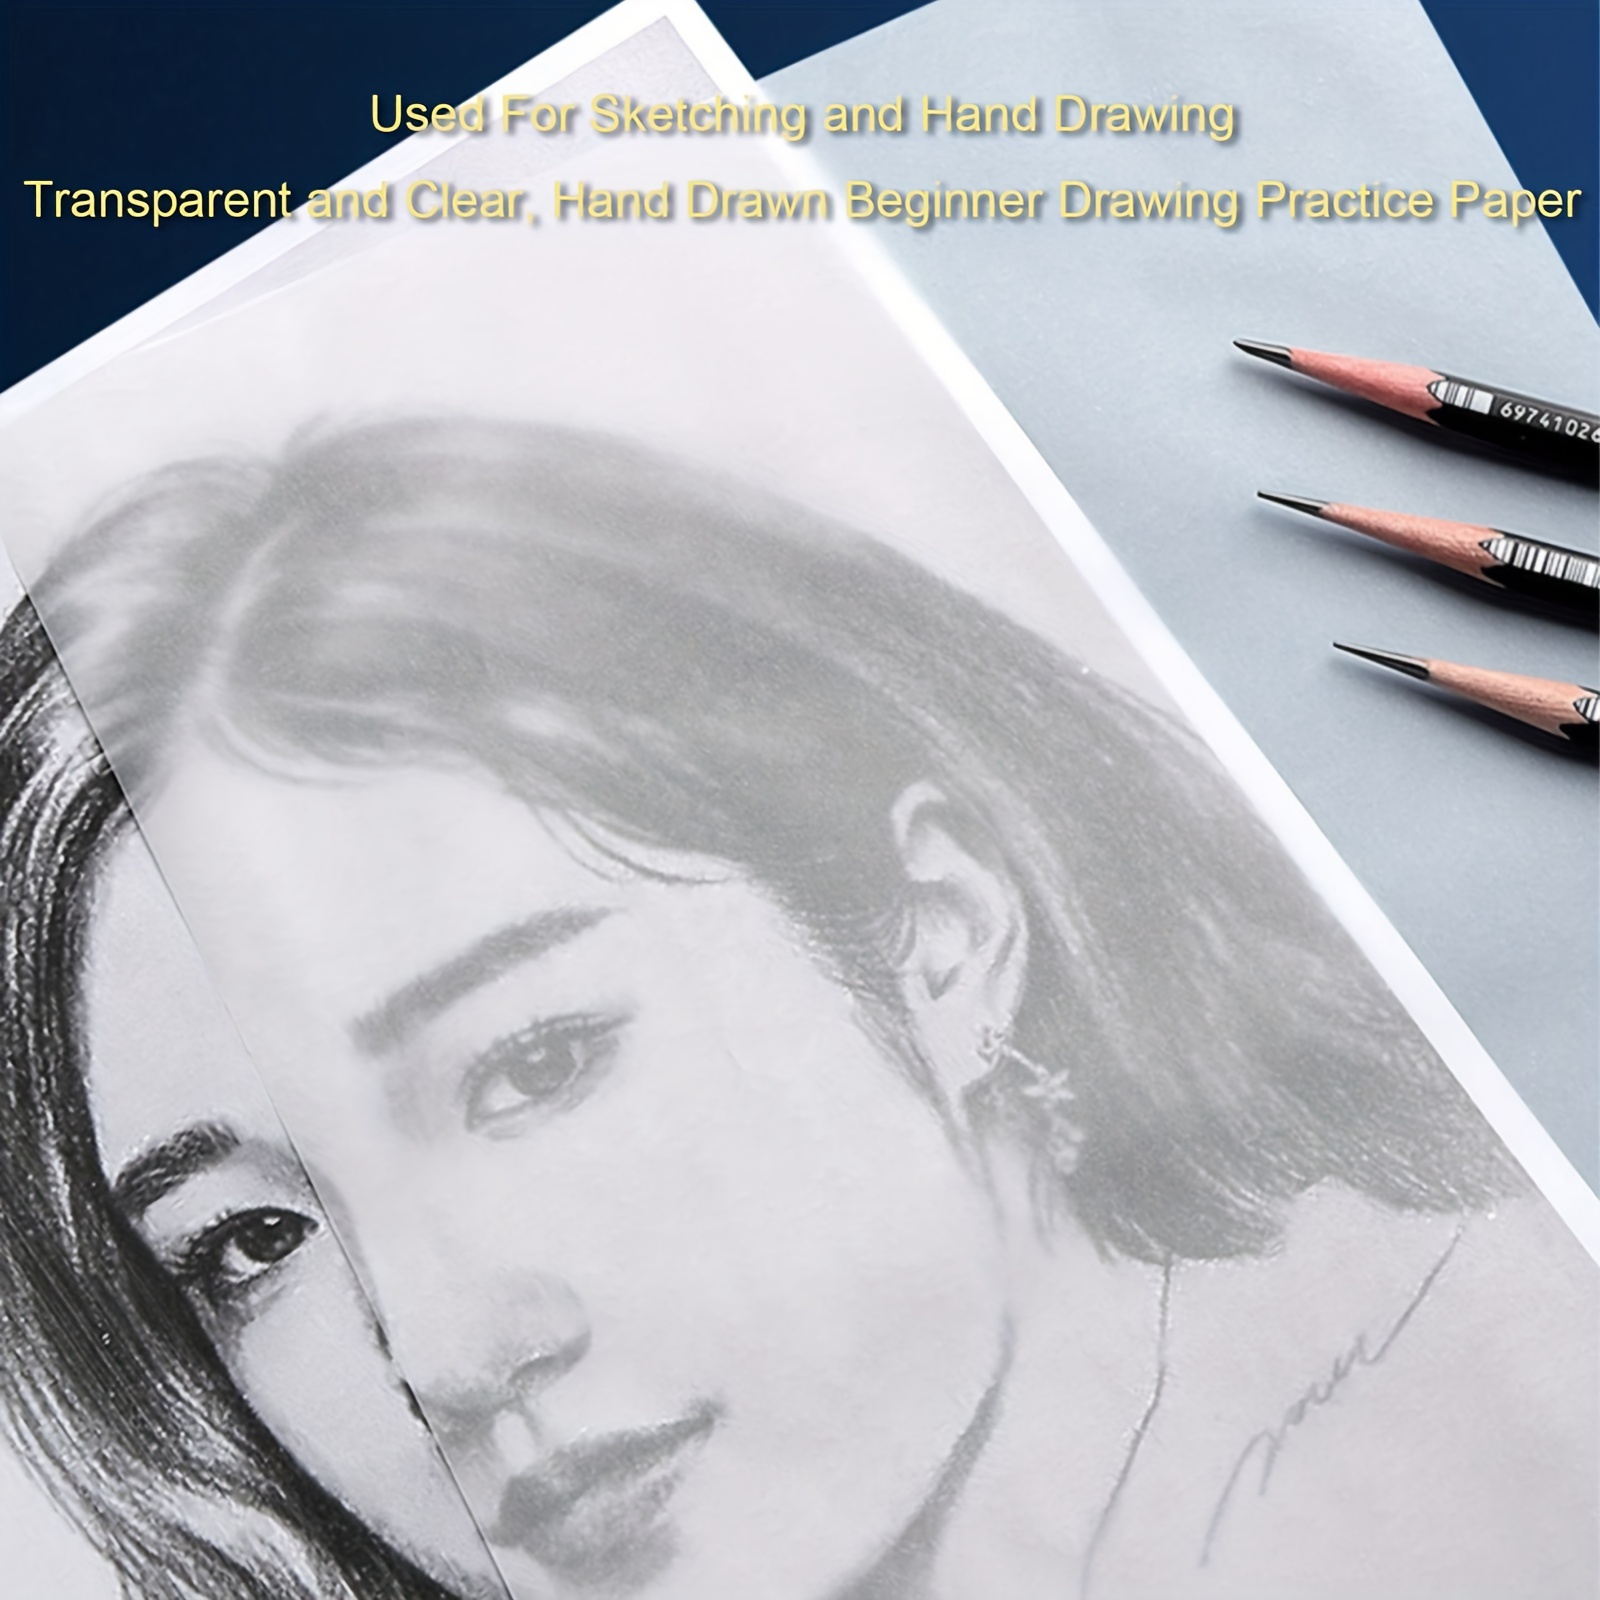 HOW TO: transfer a sketch using tracing paper 